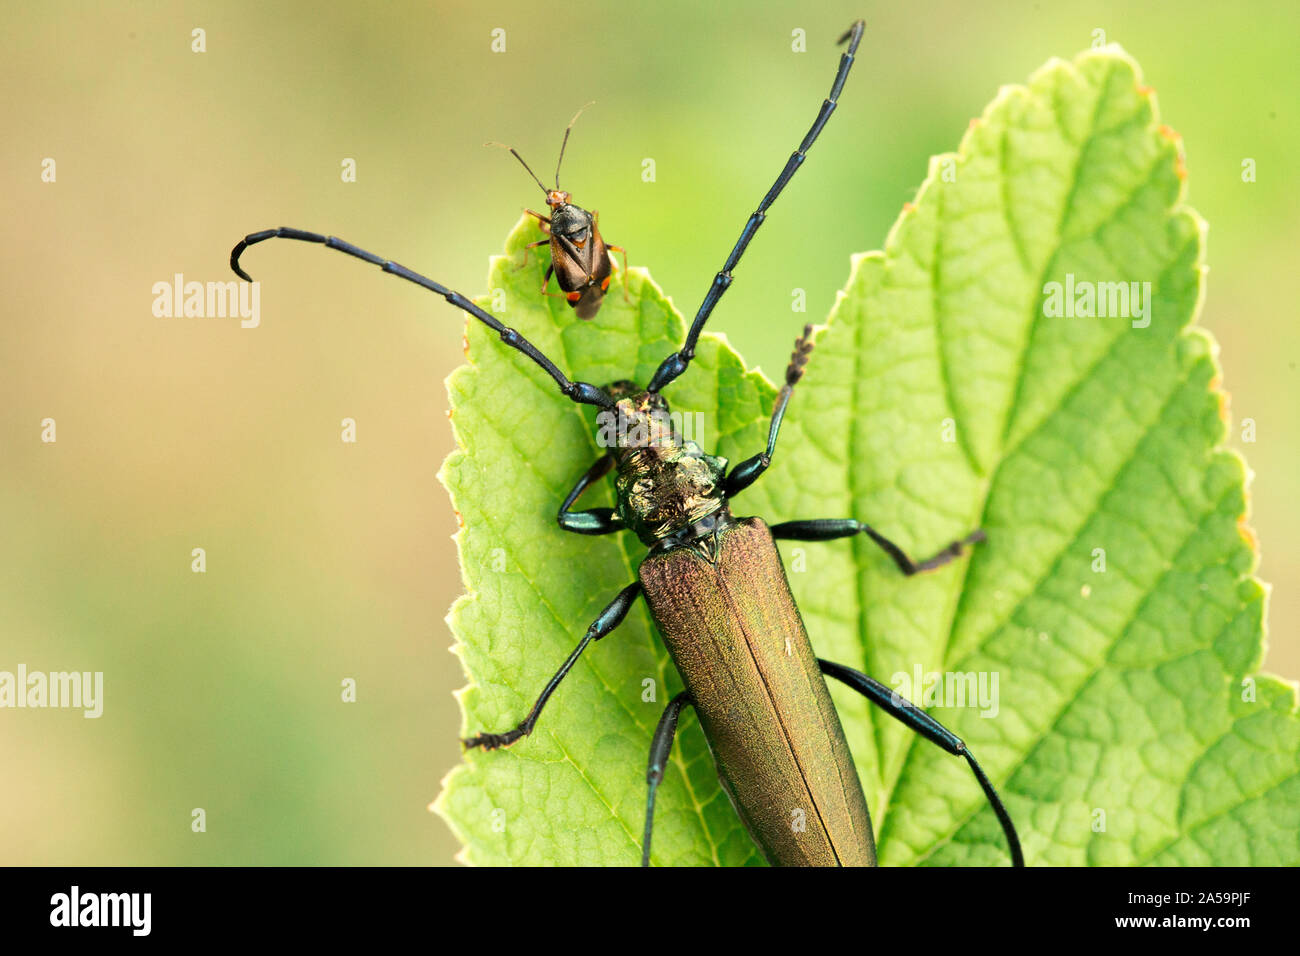 Musk beetle Aromia moschata close-up, Eurasian species of longhorn beetle, climbing on a plant in its natural habitat With another beetle in front of Stock Photo